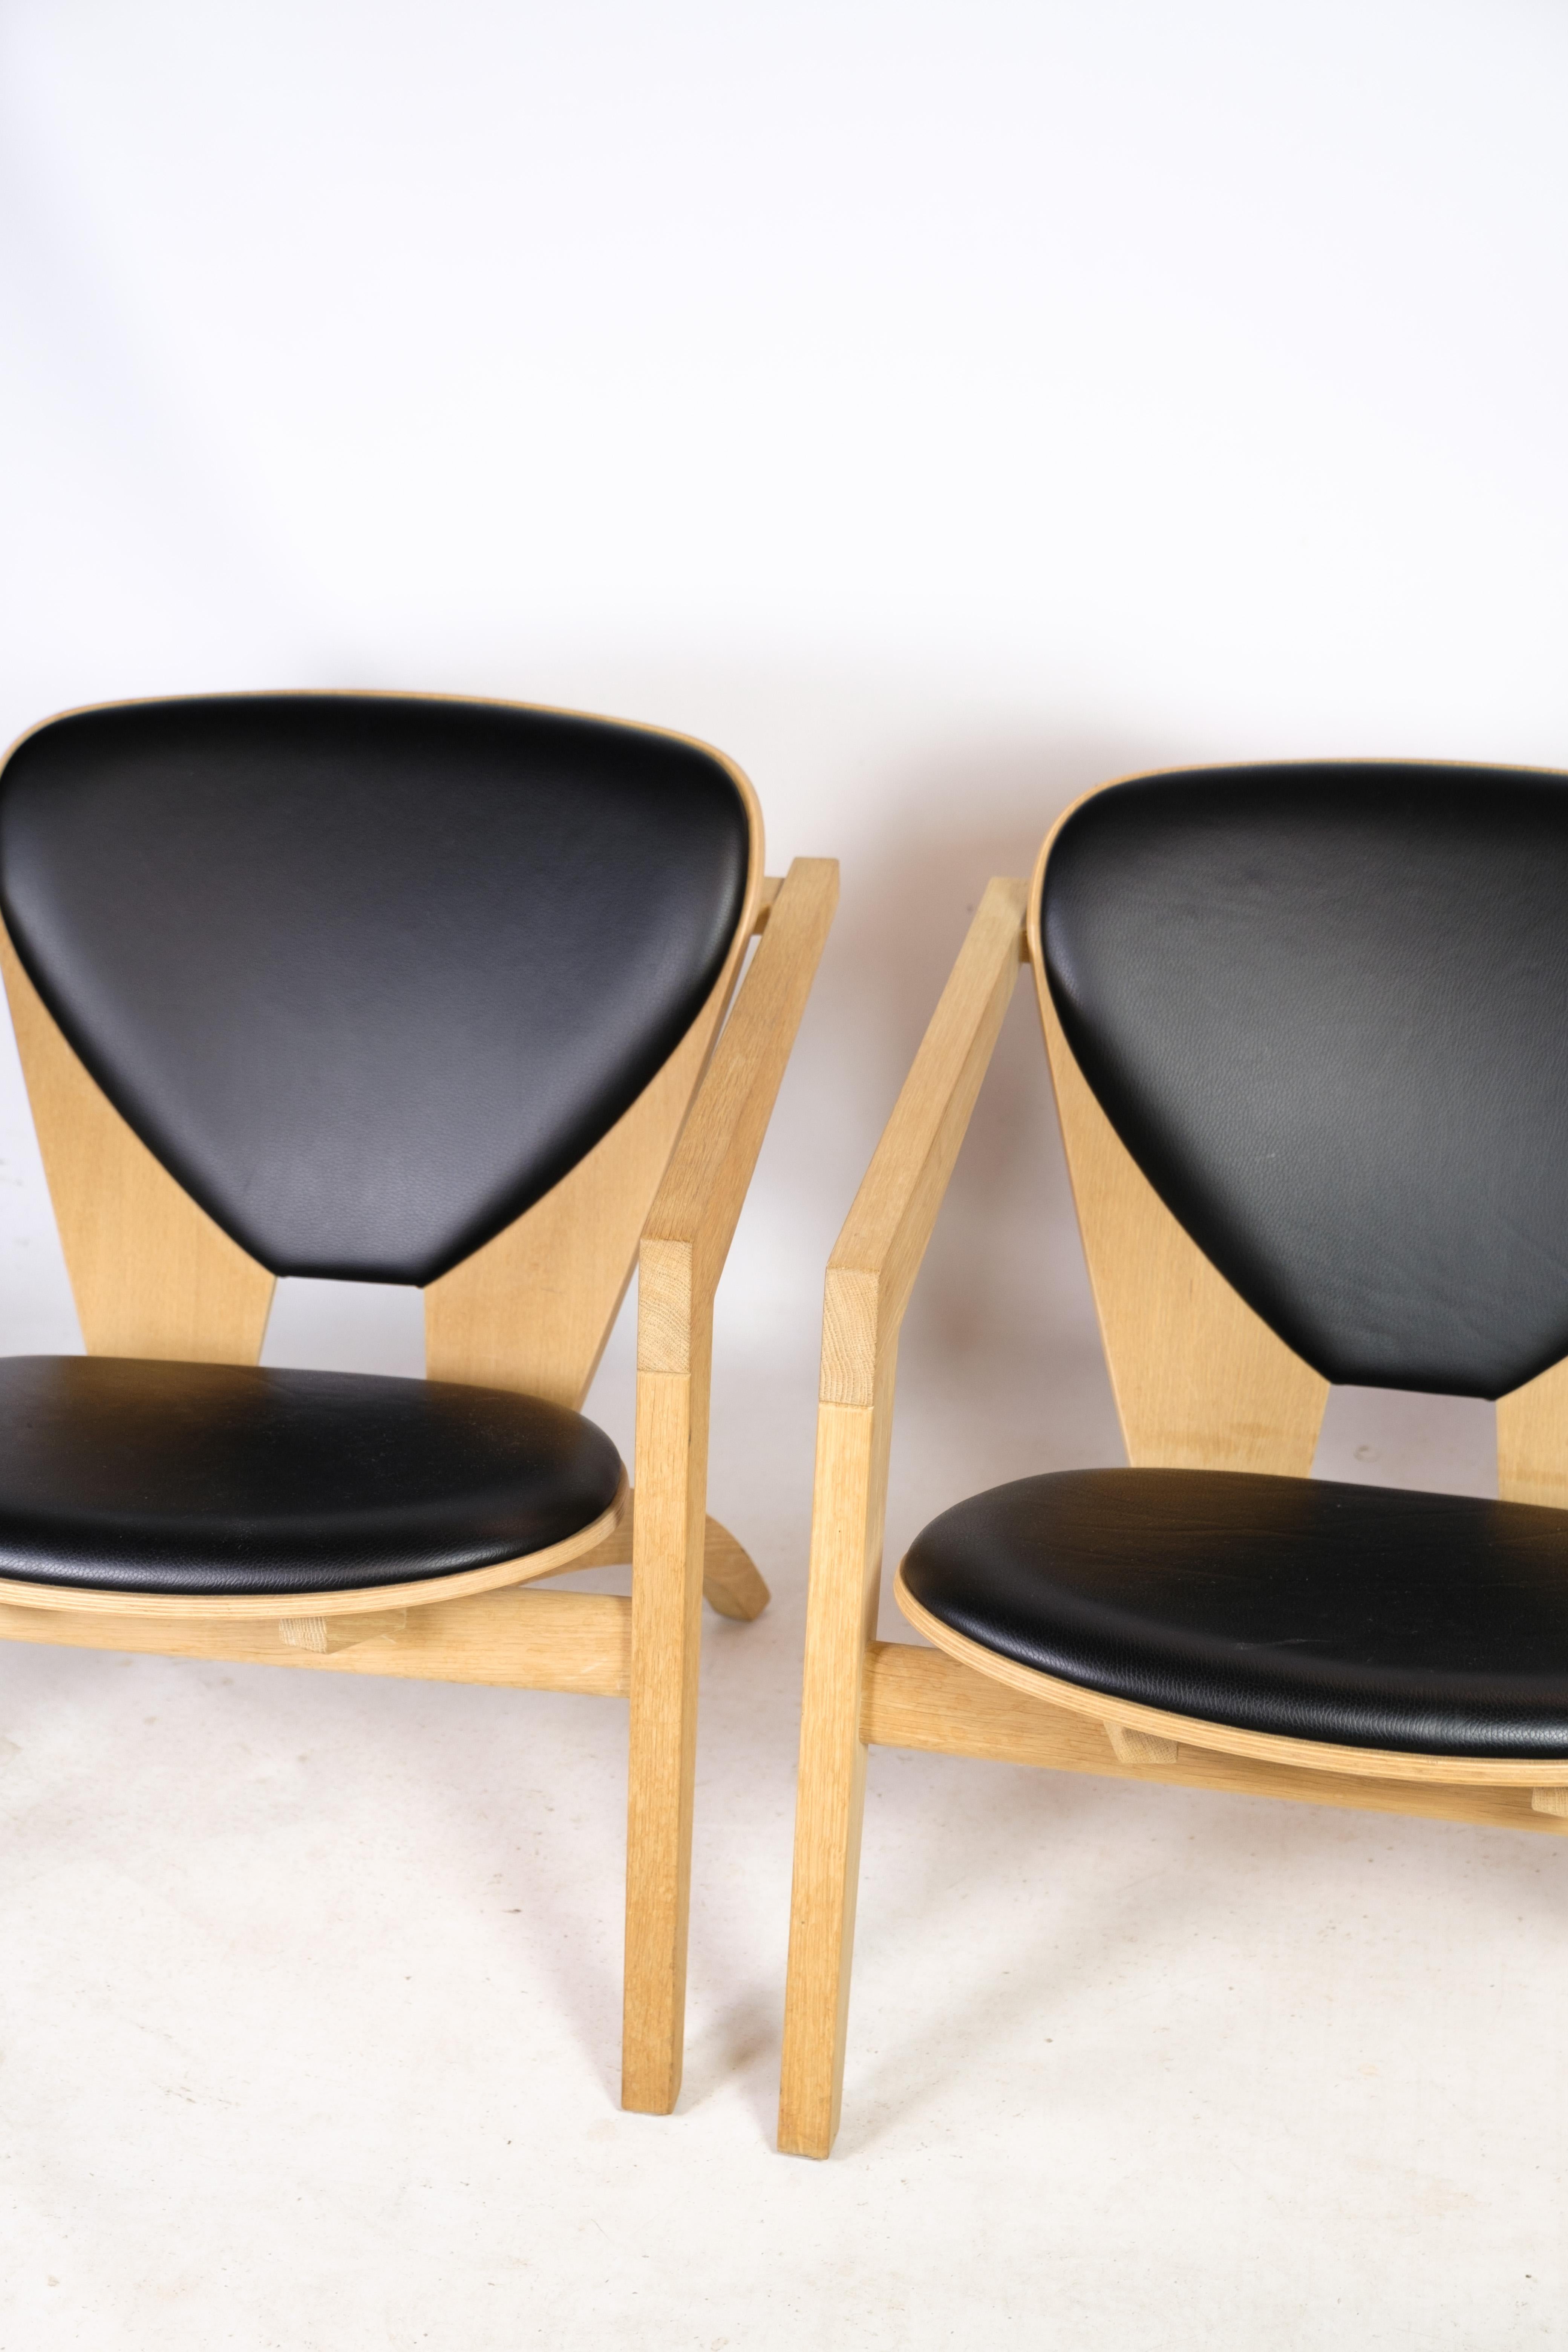 One of Wegner's designs is the GE 460 armchair, which was created in 1977. The chair is made of soap treated oak wood and has a seat and backrest upholstered in black leather, which gives it an exclusive and elegant feel. The chair is produced and